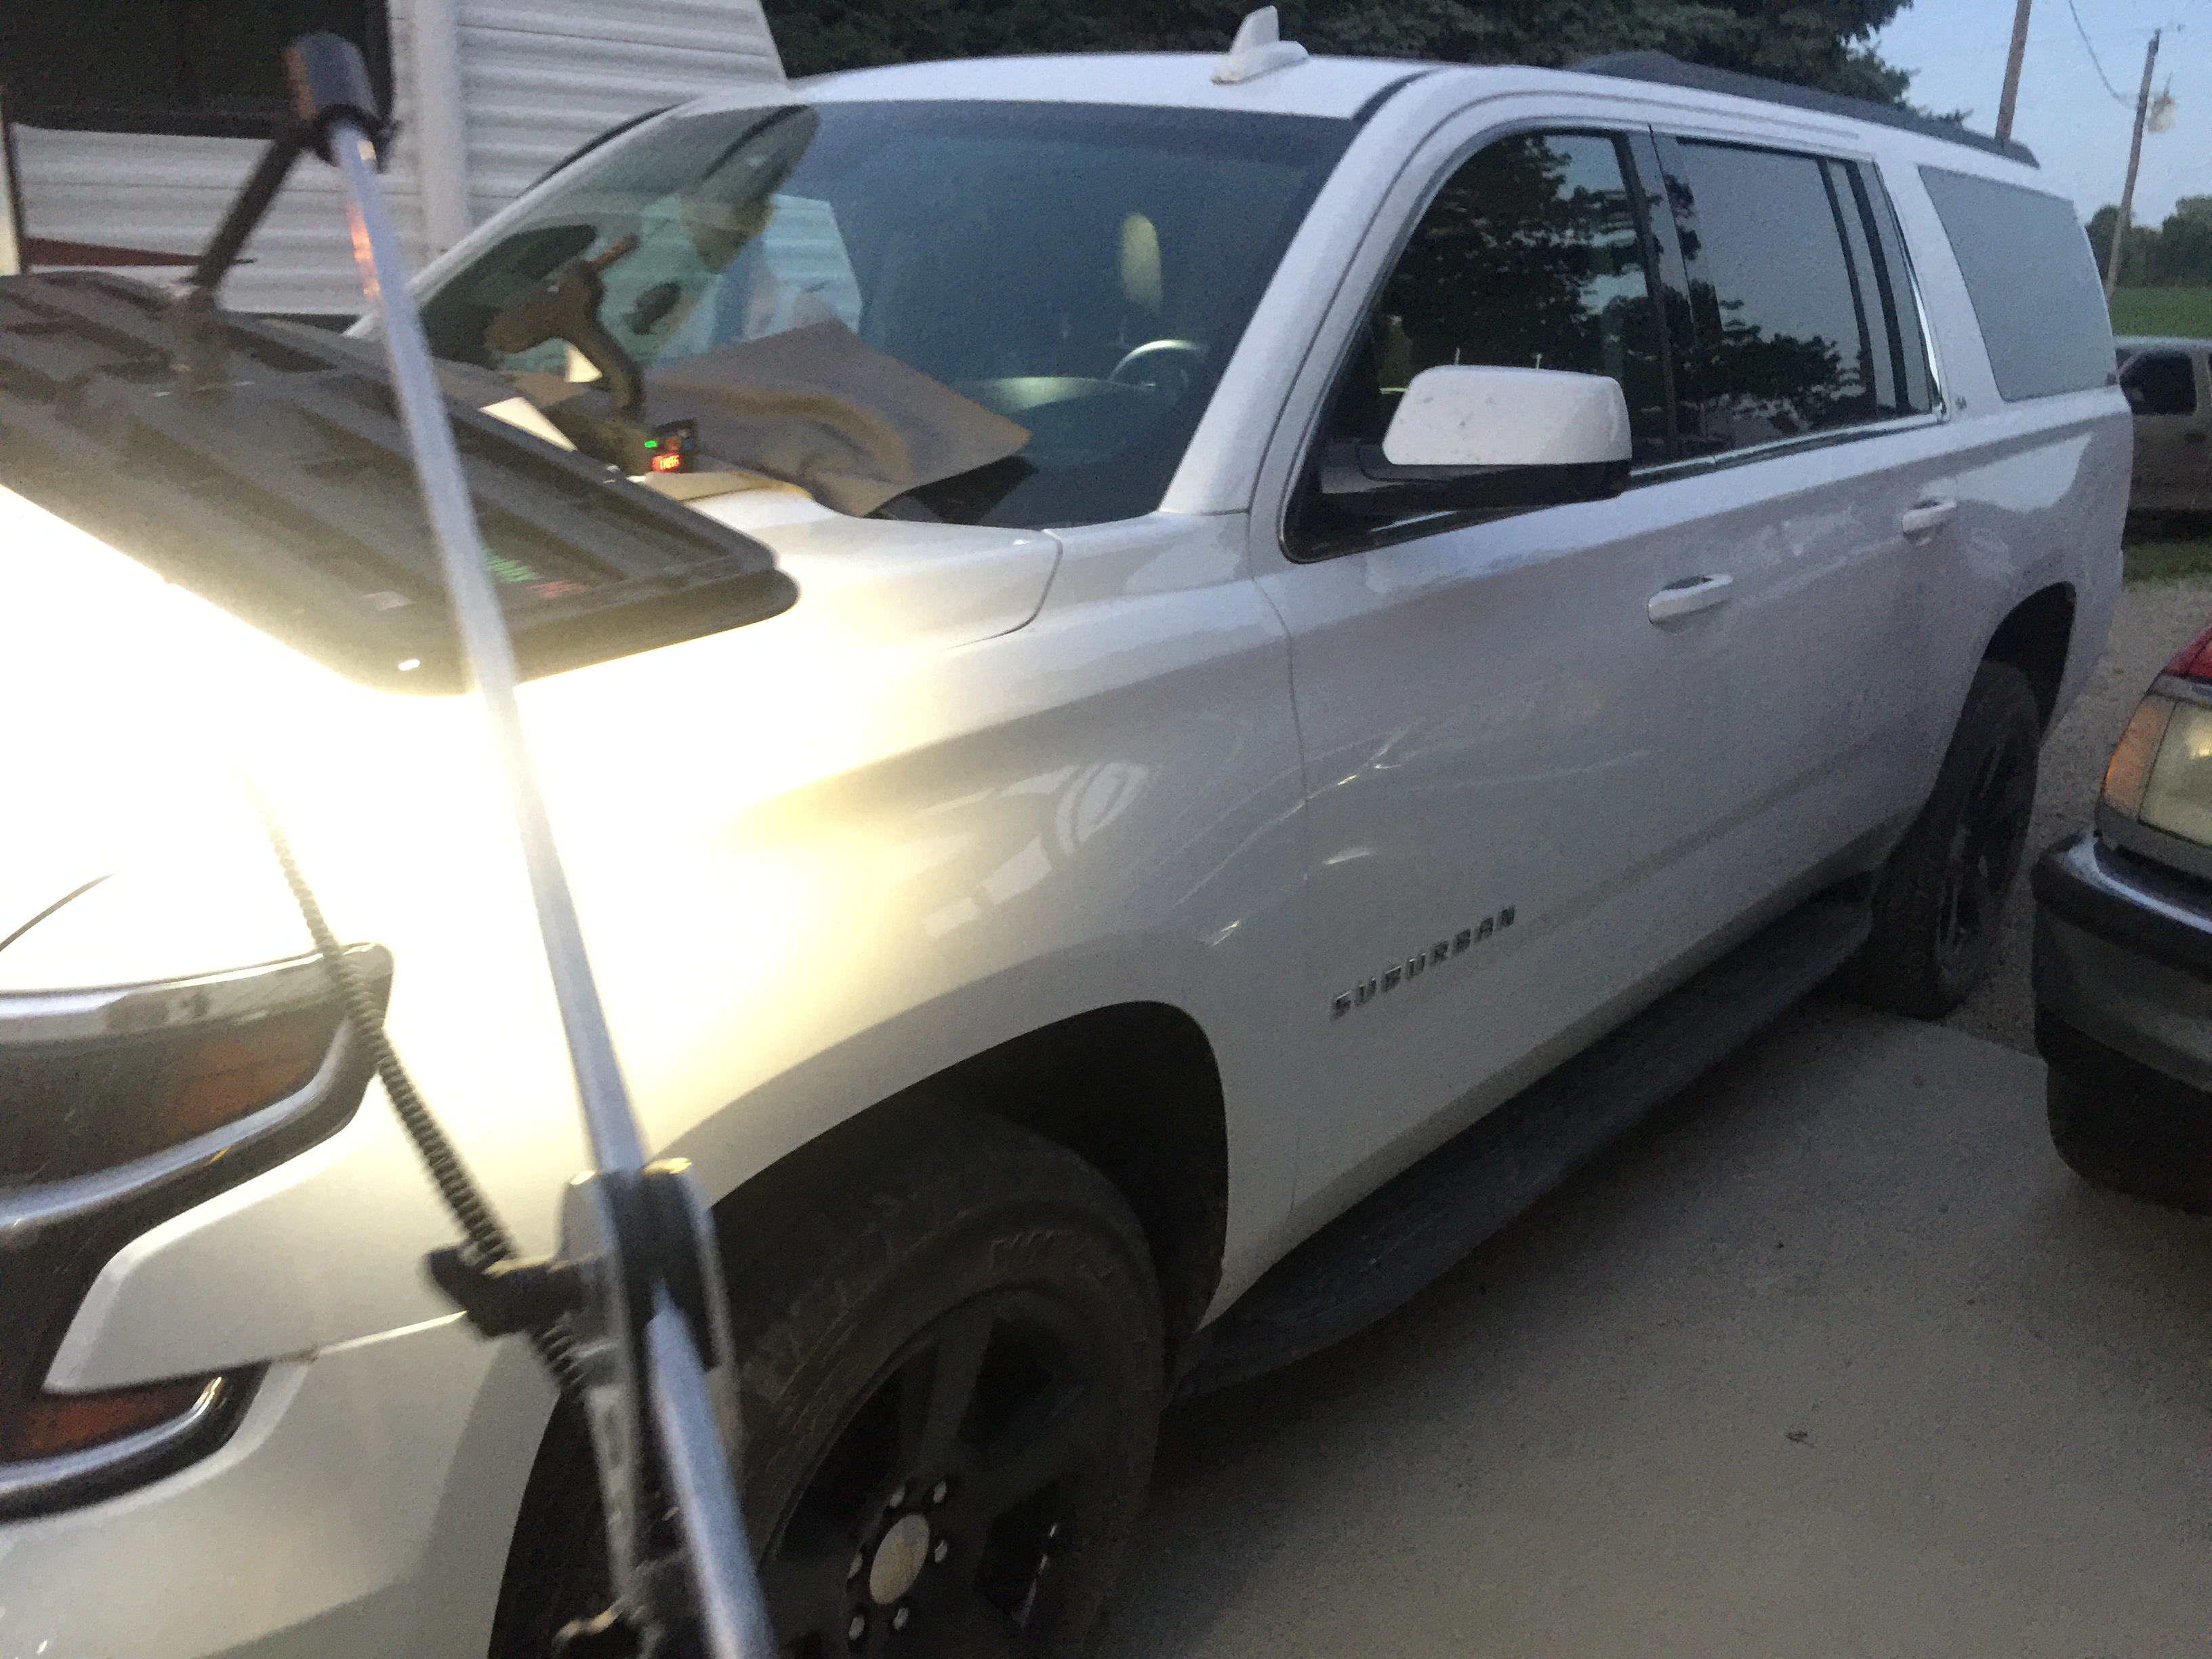 2016 Chevrolet Suburban, Dent Removal on Hood, Paintless Dent Removal Springfield IL, http://217dent.com